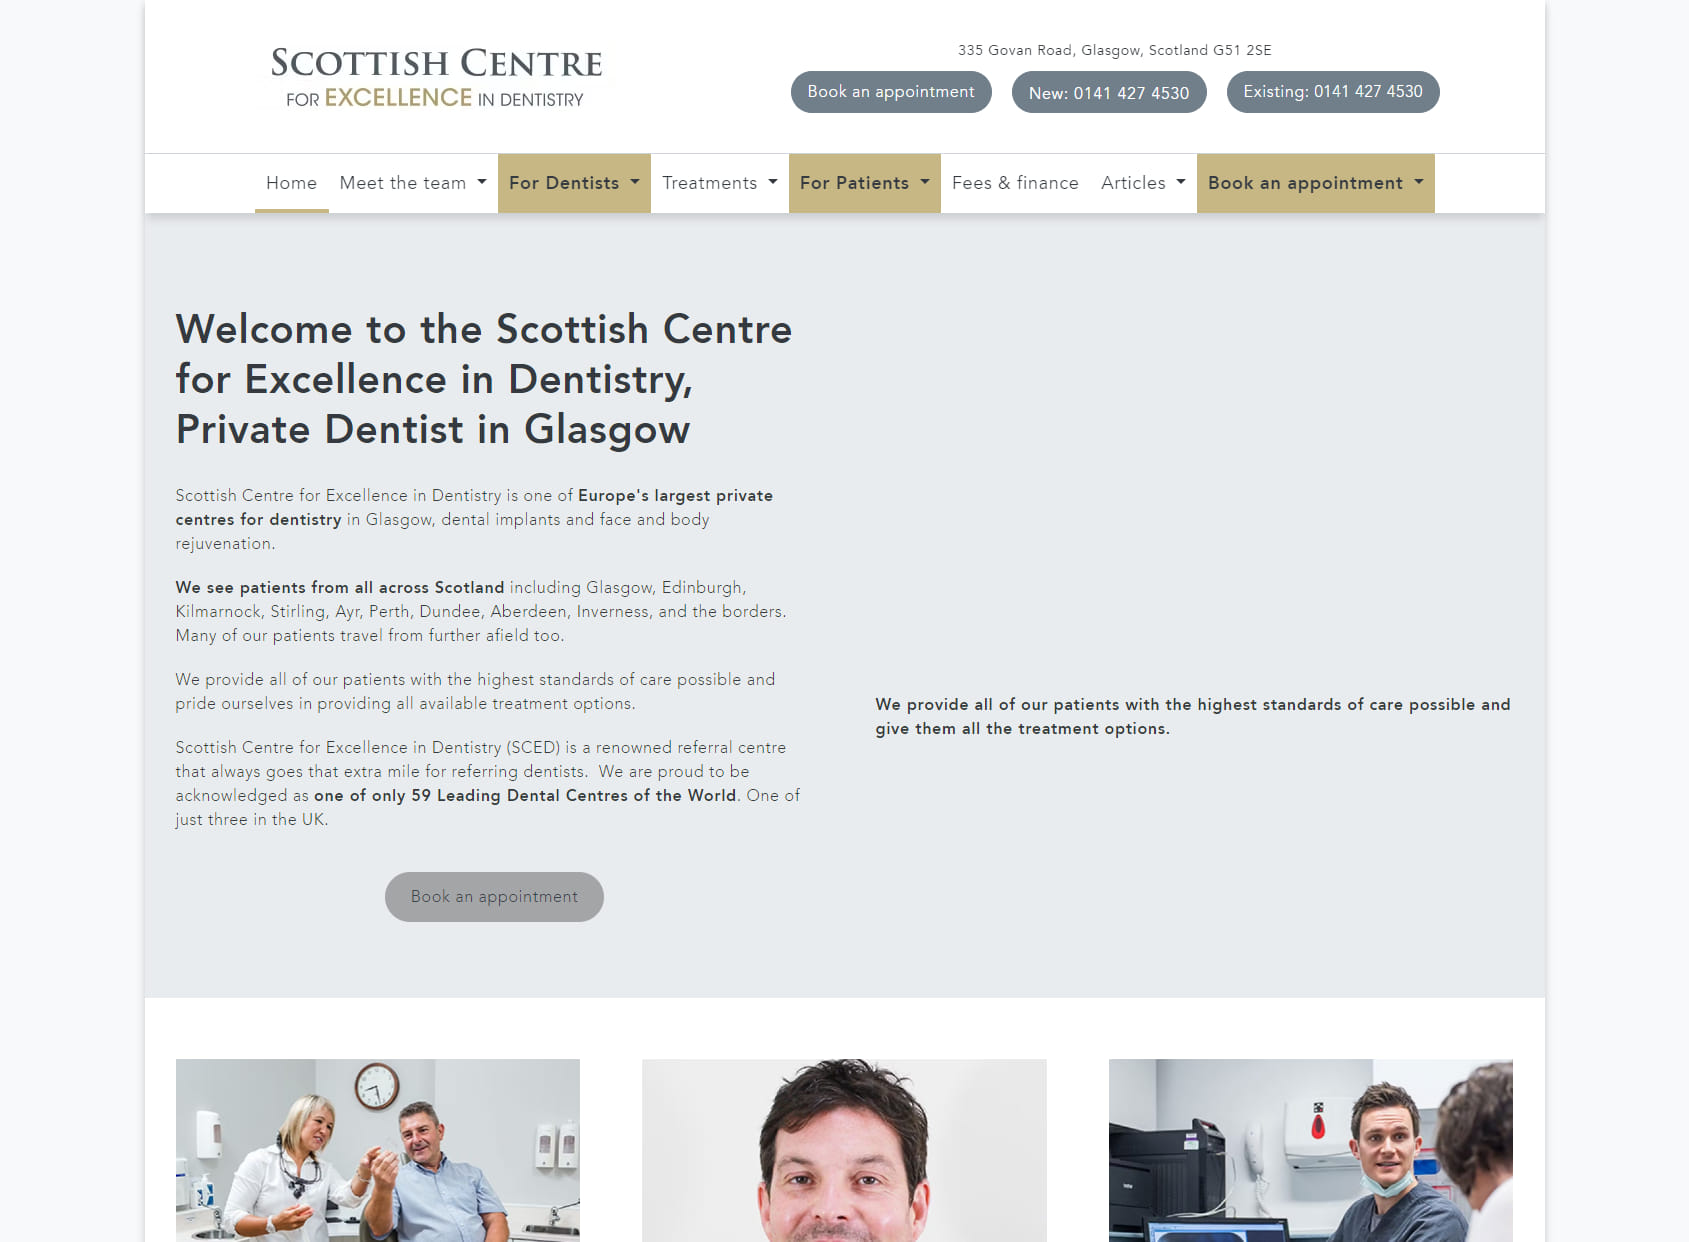 Scottish Centre for Excellence in Dentistry